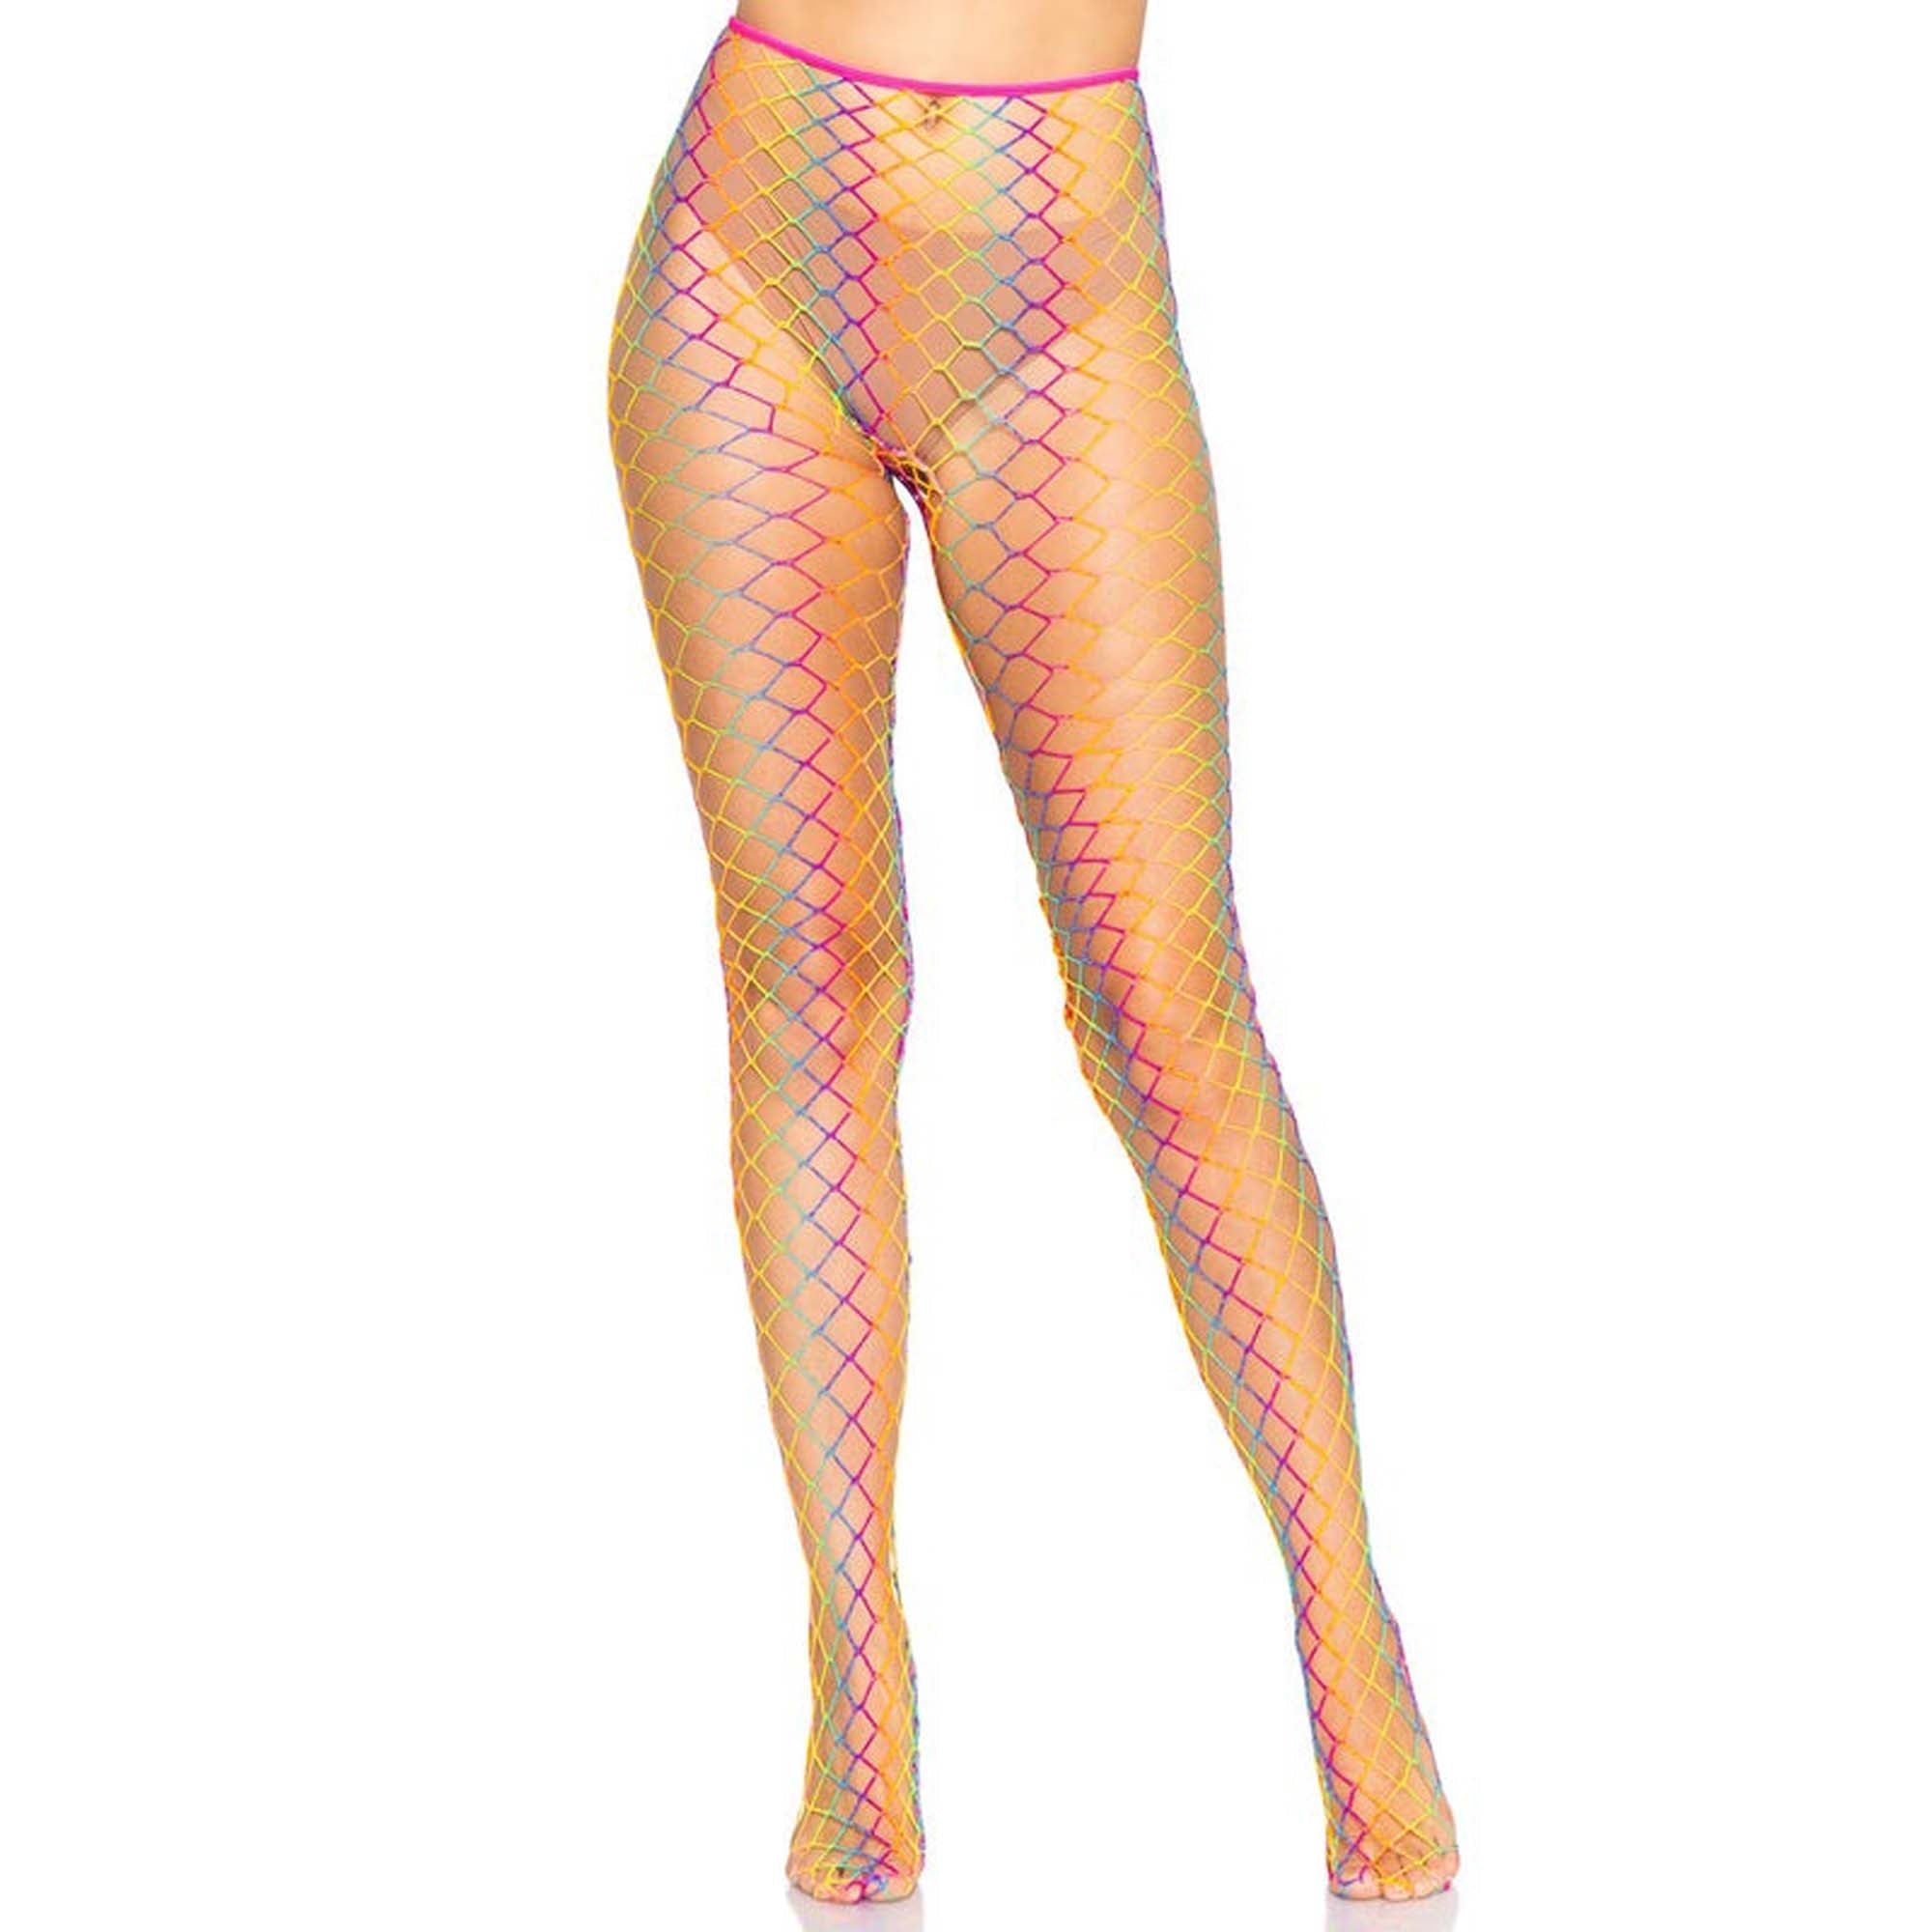 Rainbow Woven Net Tight for Adults